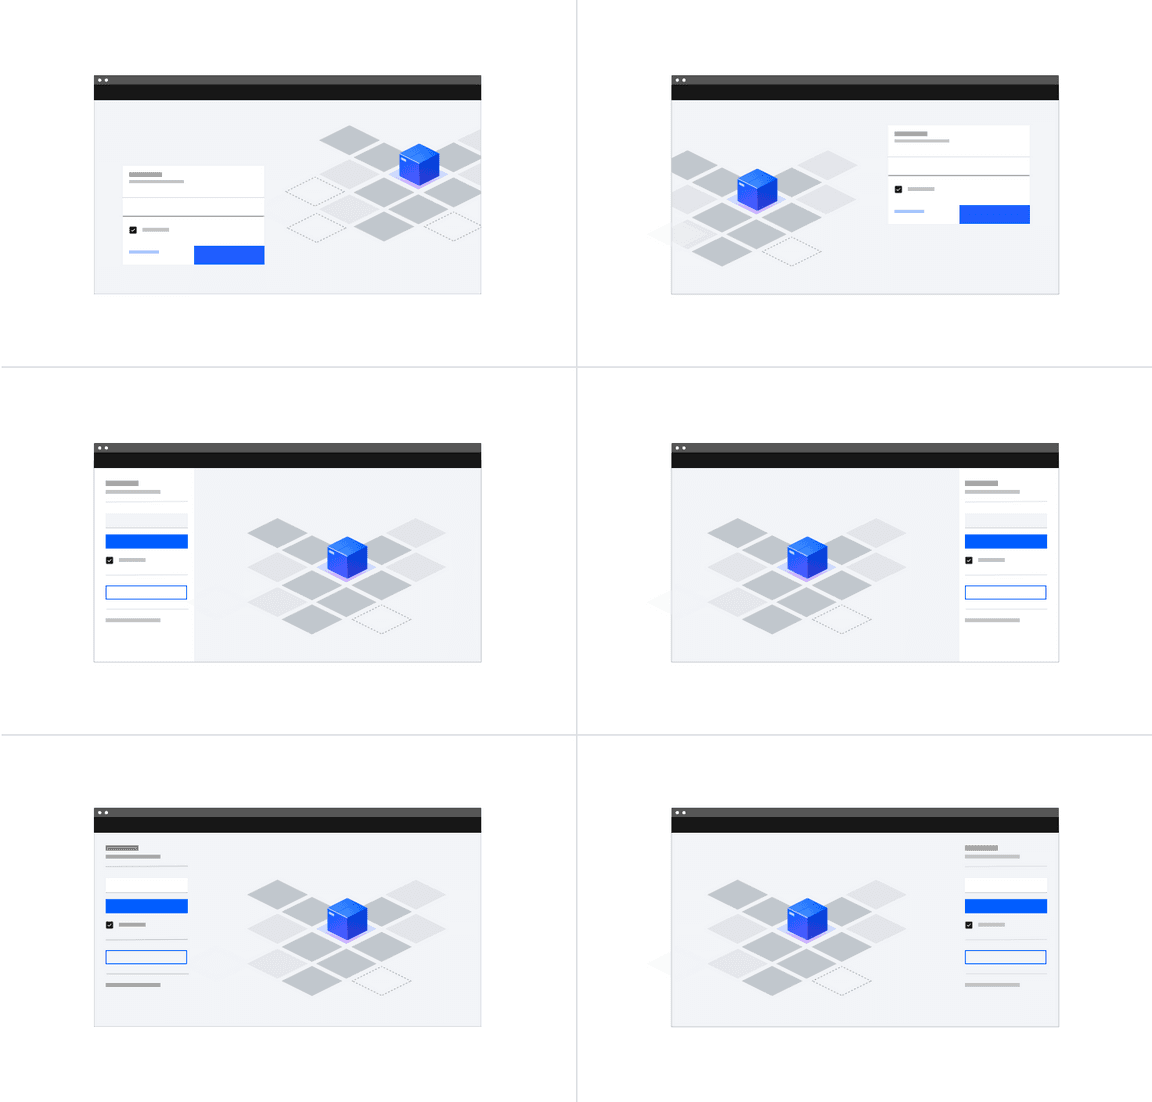 Example of split-screen login forms paired with an illustration